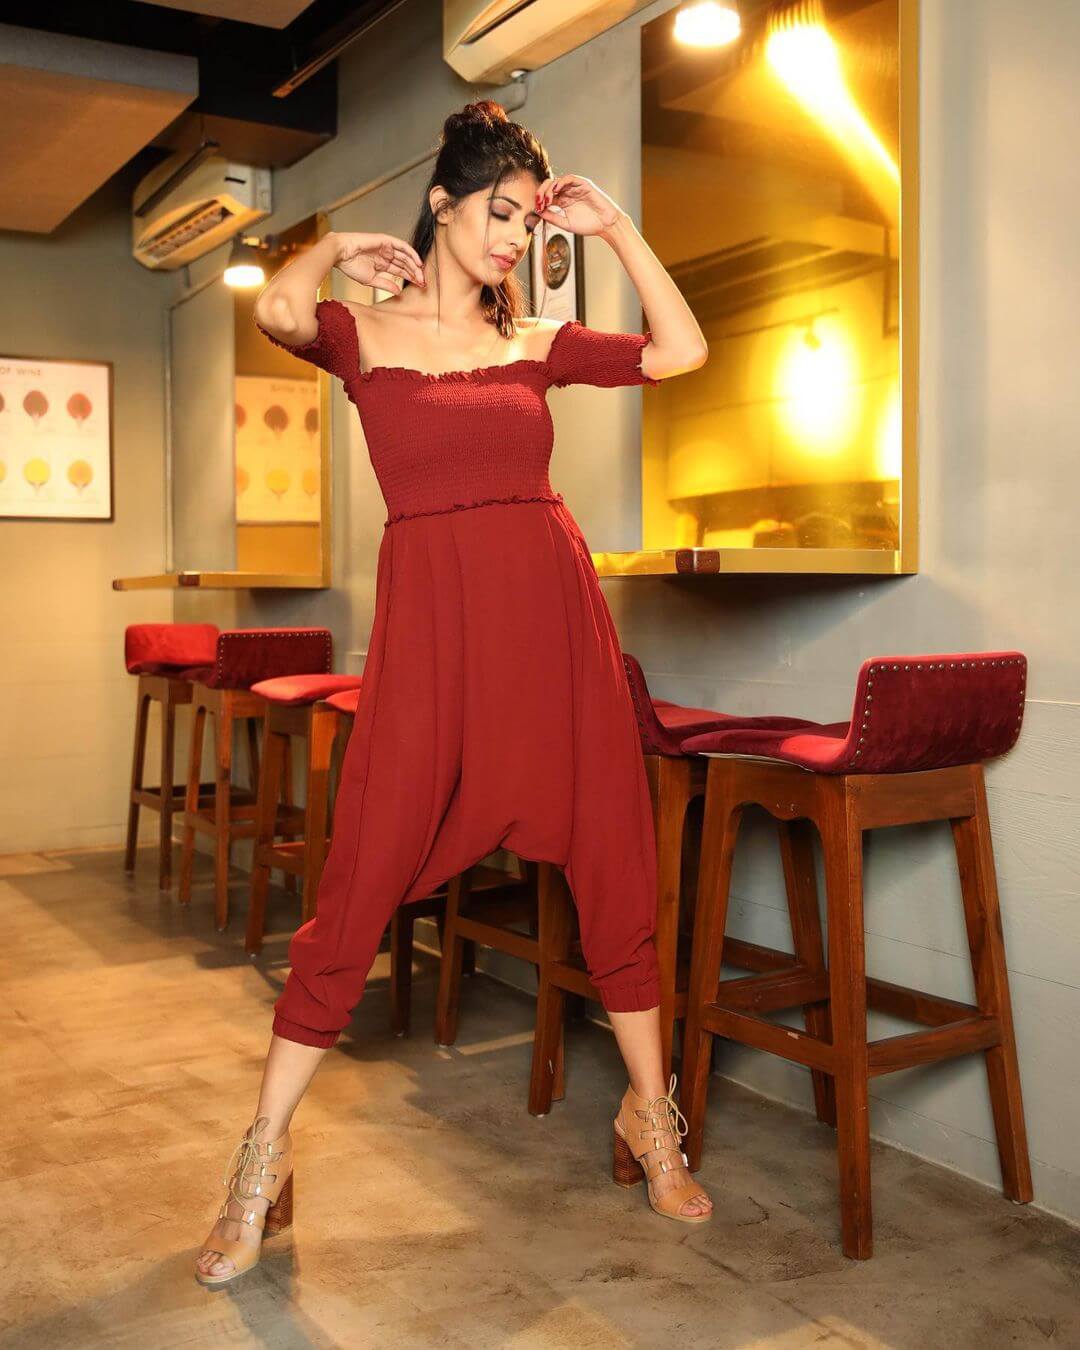 Aishwarya Sakhuja In Tempting Red Off-Shoulder Contemporary Dress